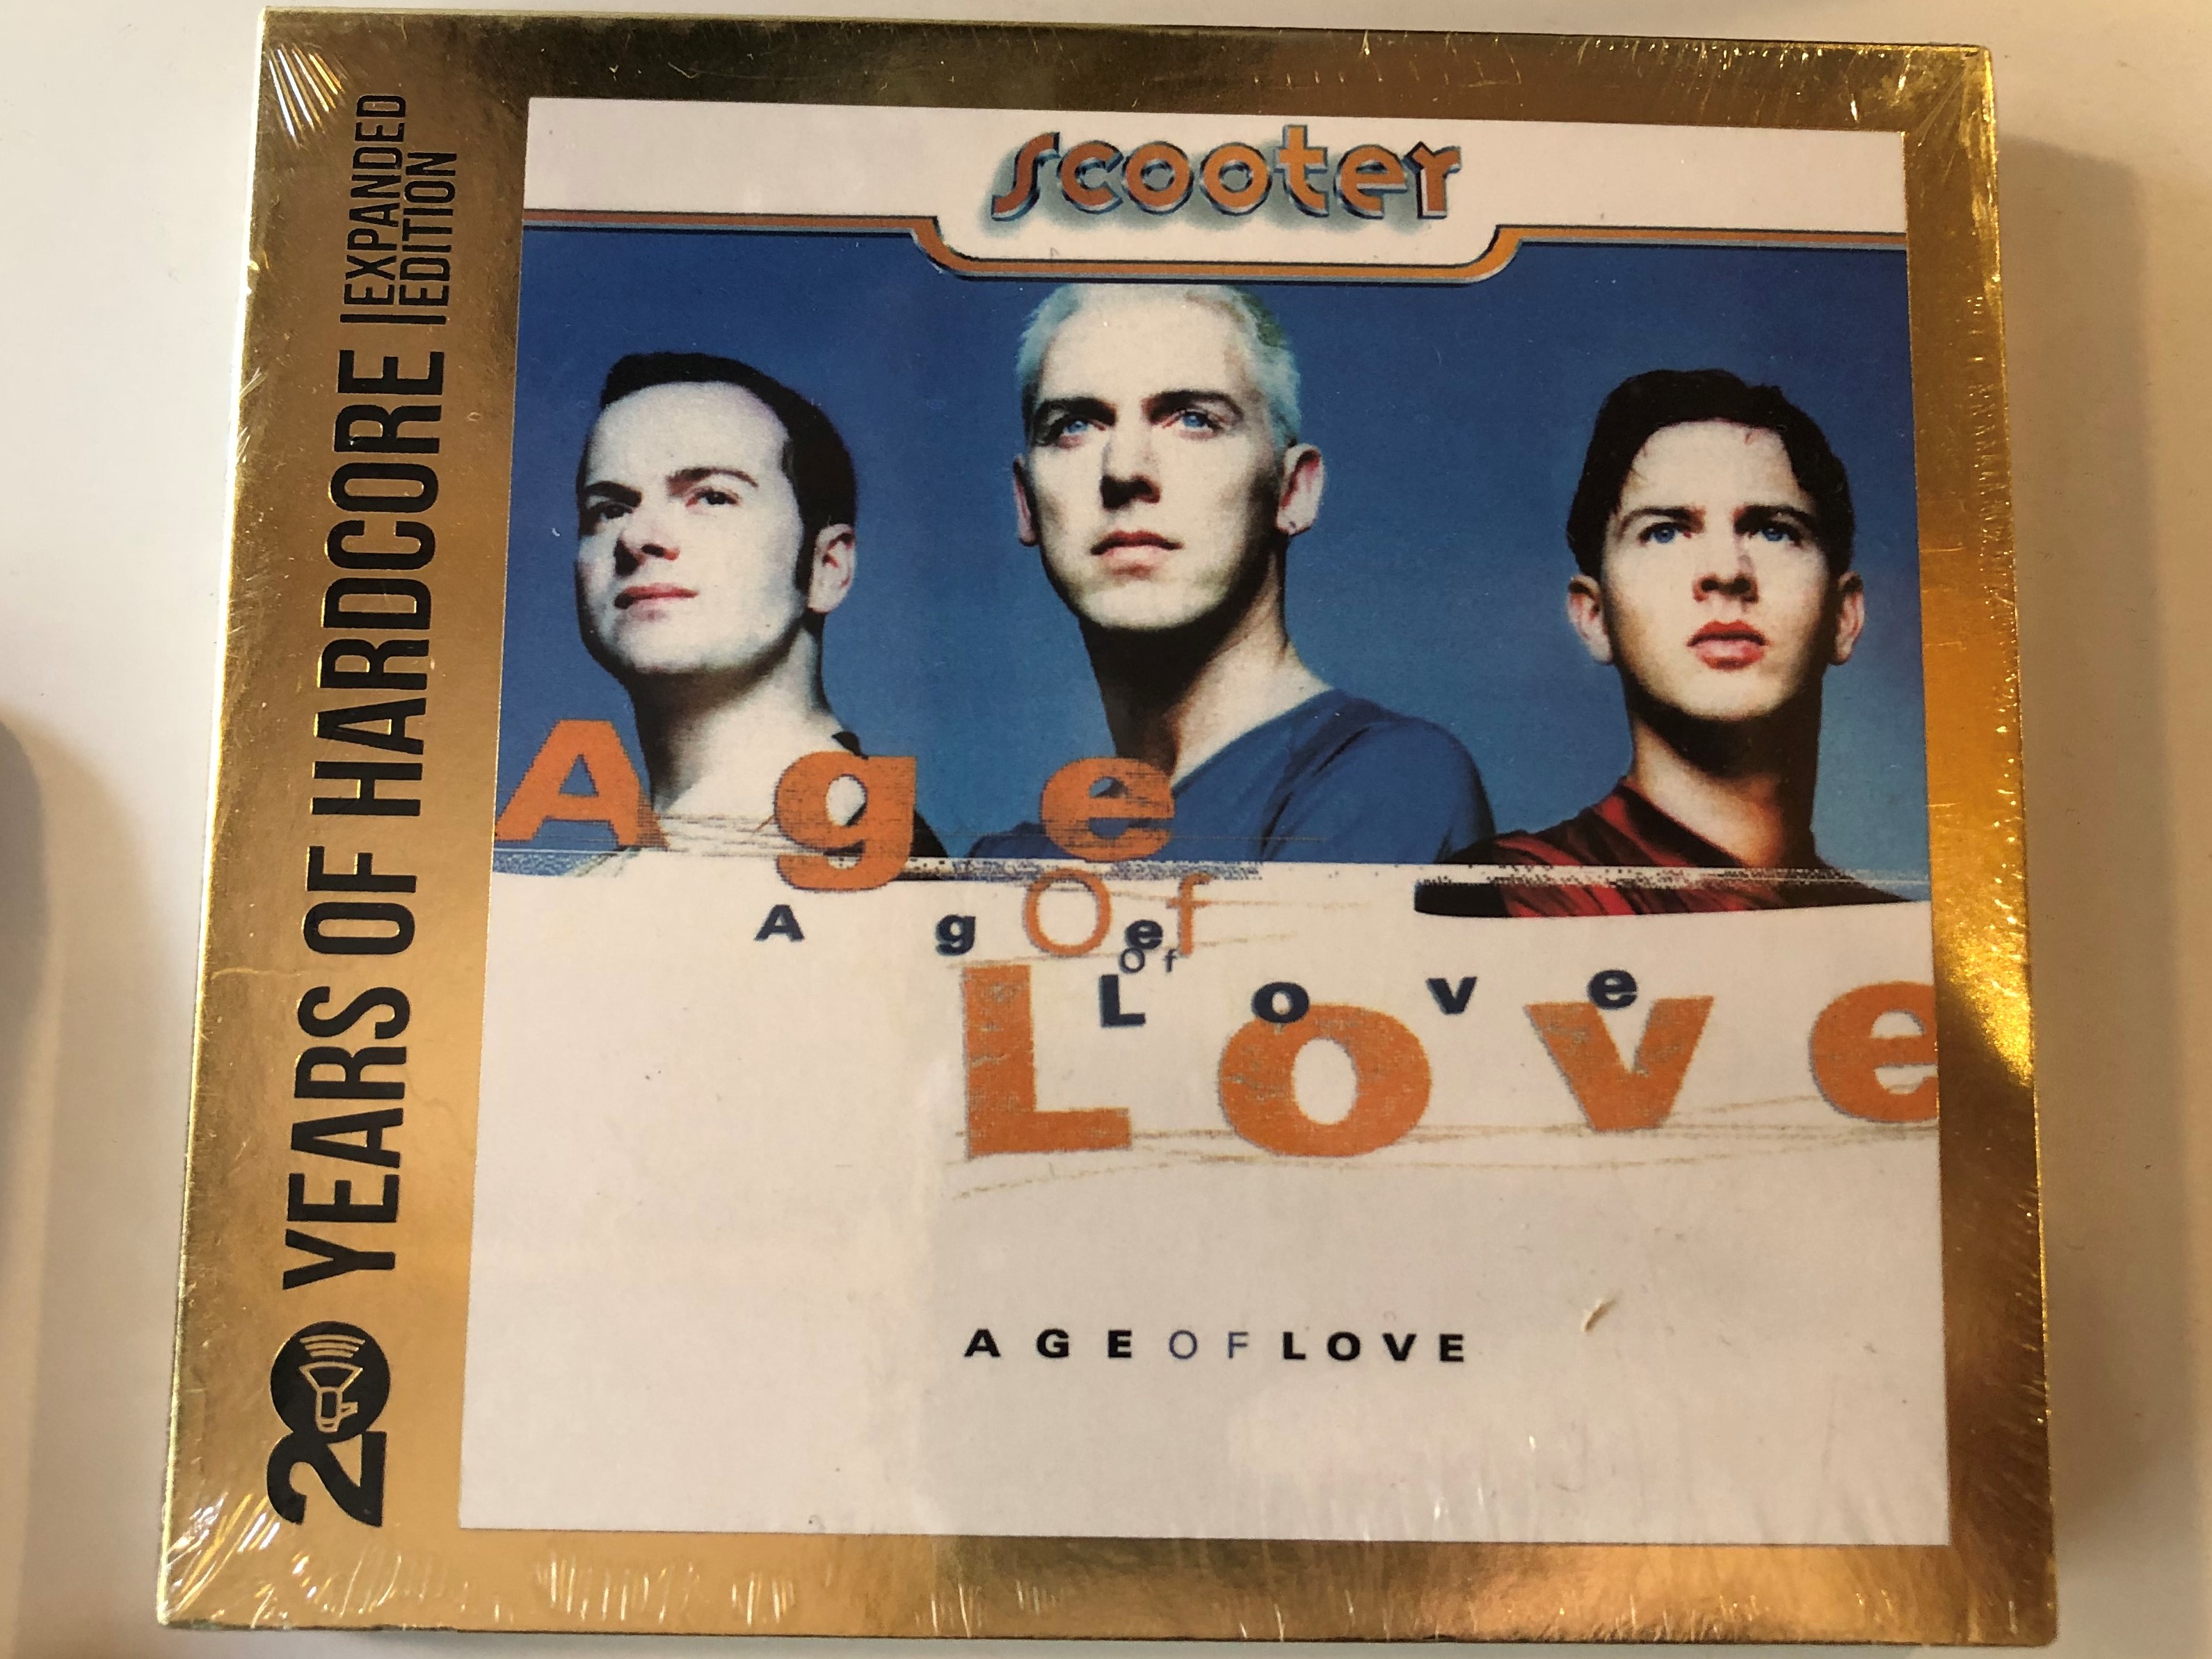 scooter-age-of-love-20-years-of-hardcore-expanded-edition-sheffield-tunes-3x-audio-cd-2013-1062951stu-1-.jpg